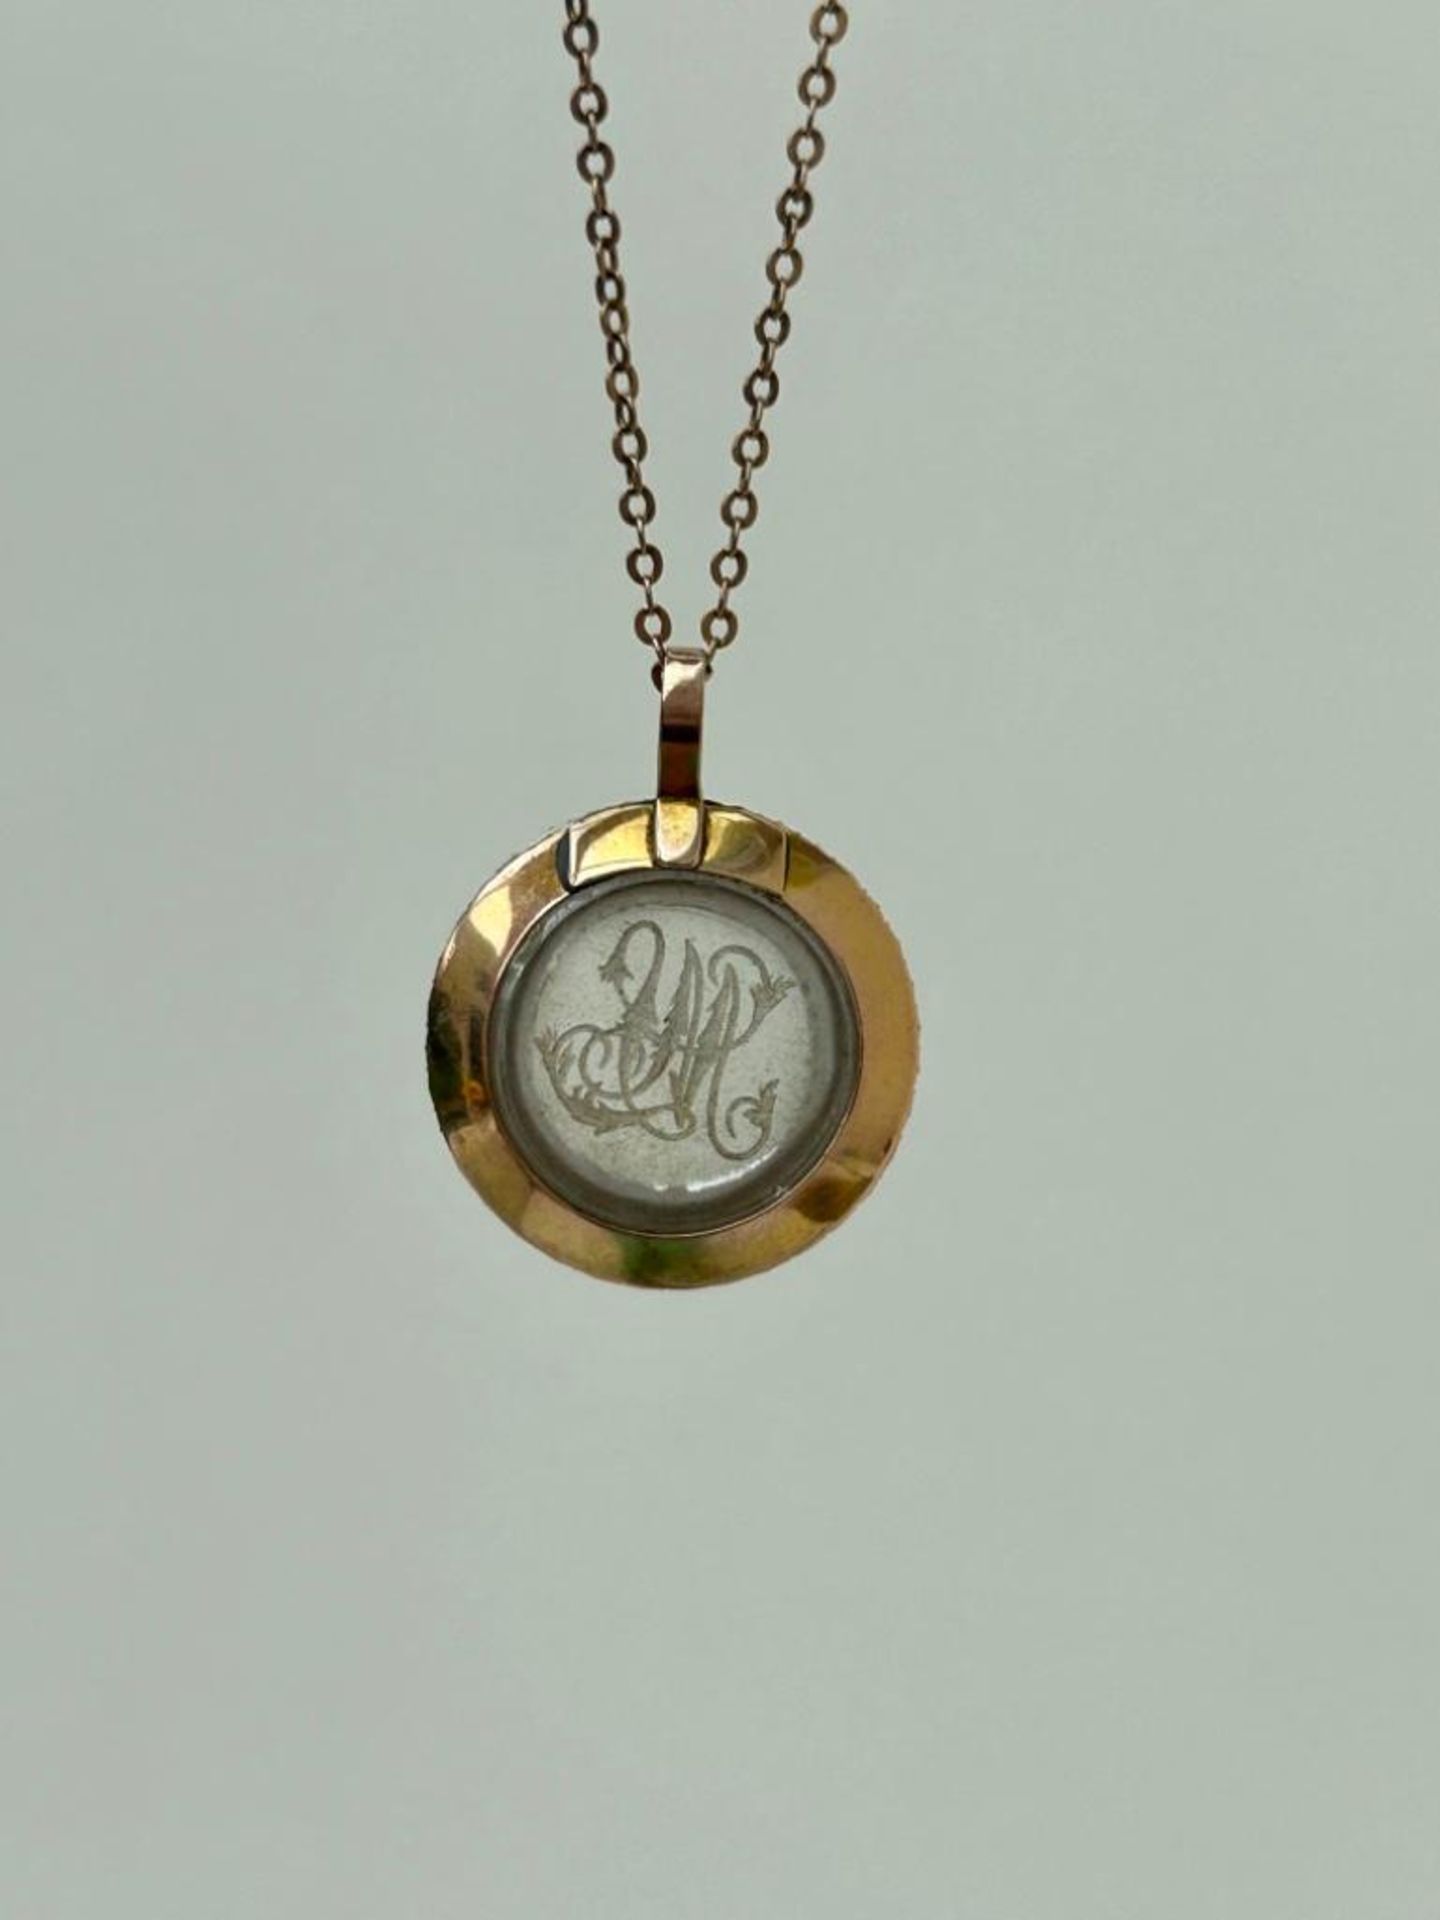 Antique Gold Domed Essex Crystal Monogram and Pearl Surrounded Pendant on Chain - Image 5 of 5